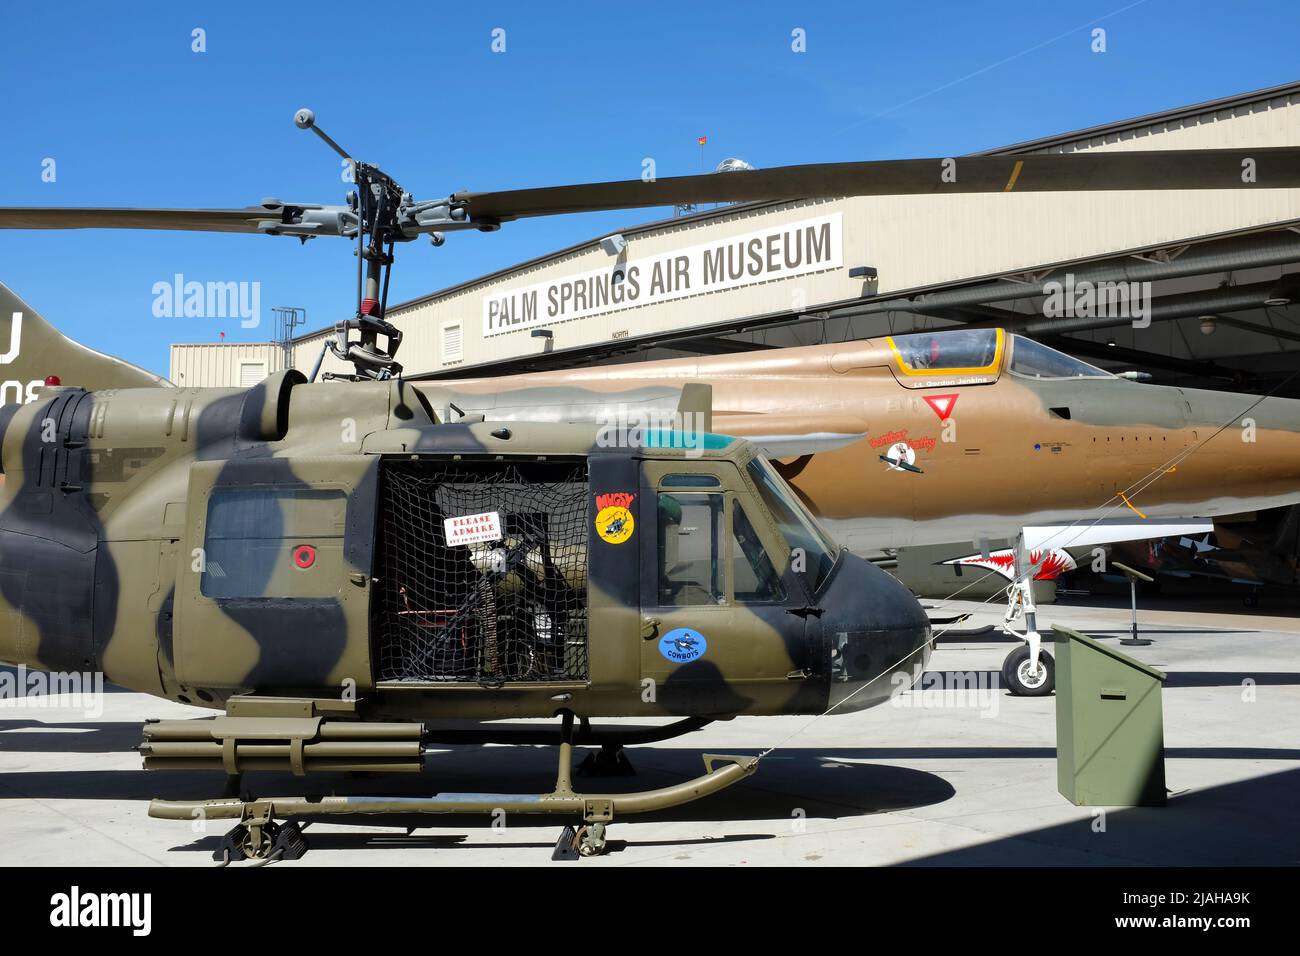 PALM SPRINGS, CA - MARCH 24, 2017: Aircraft on display at the Palm Springs Air Museum. Stock Photo